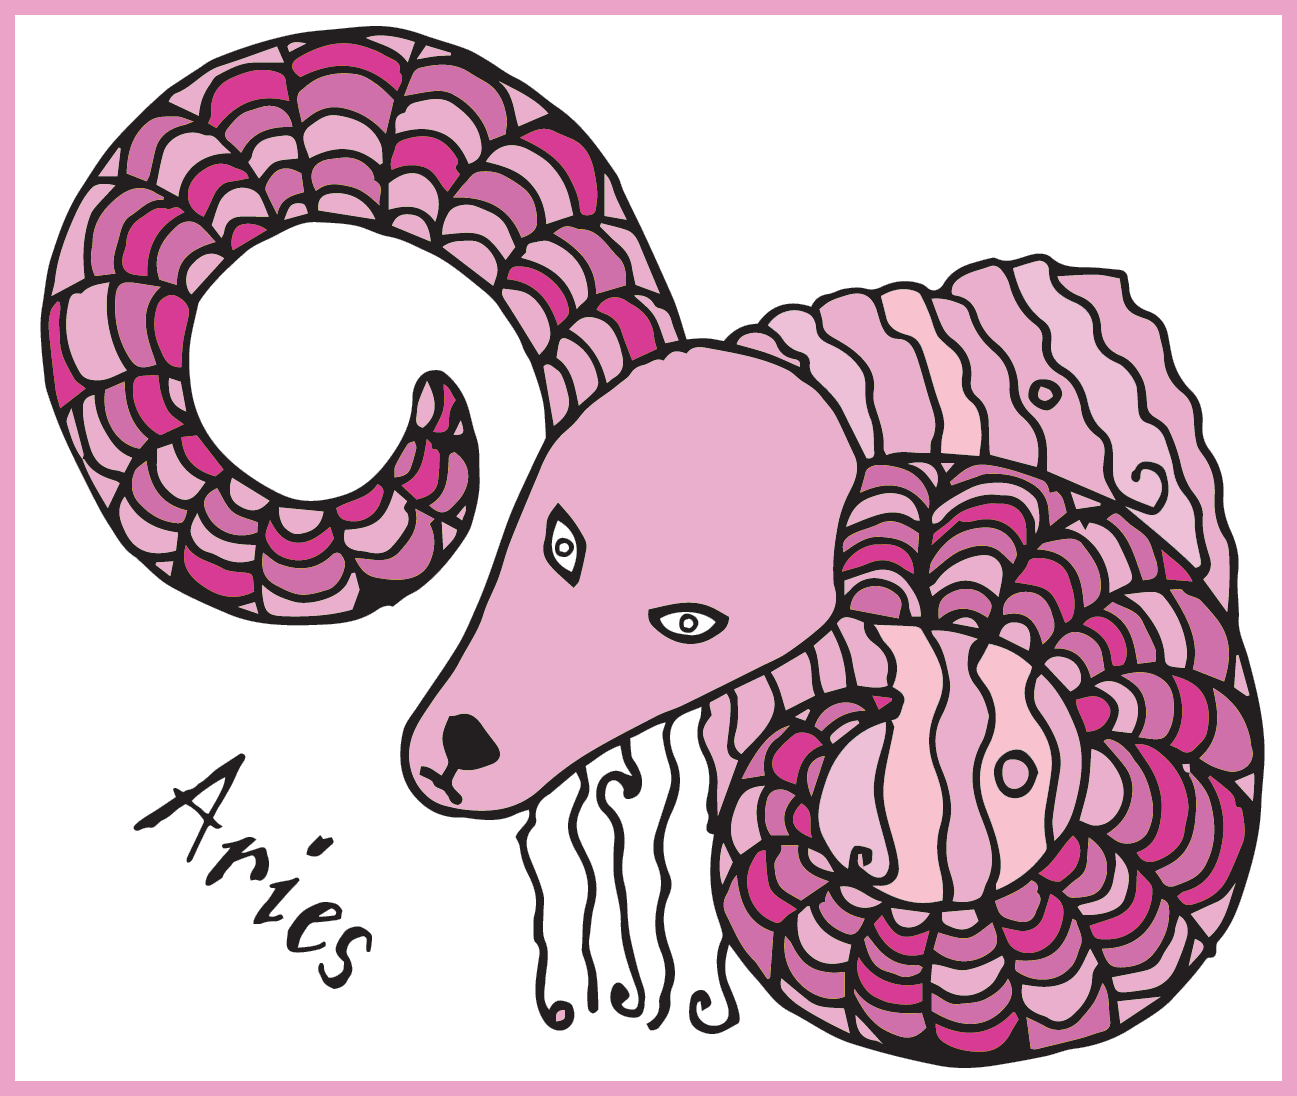 An illustration of a ram with large horns in many different shades of pink